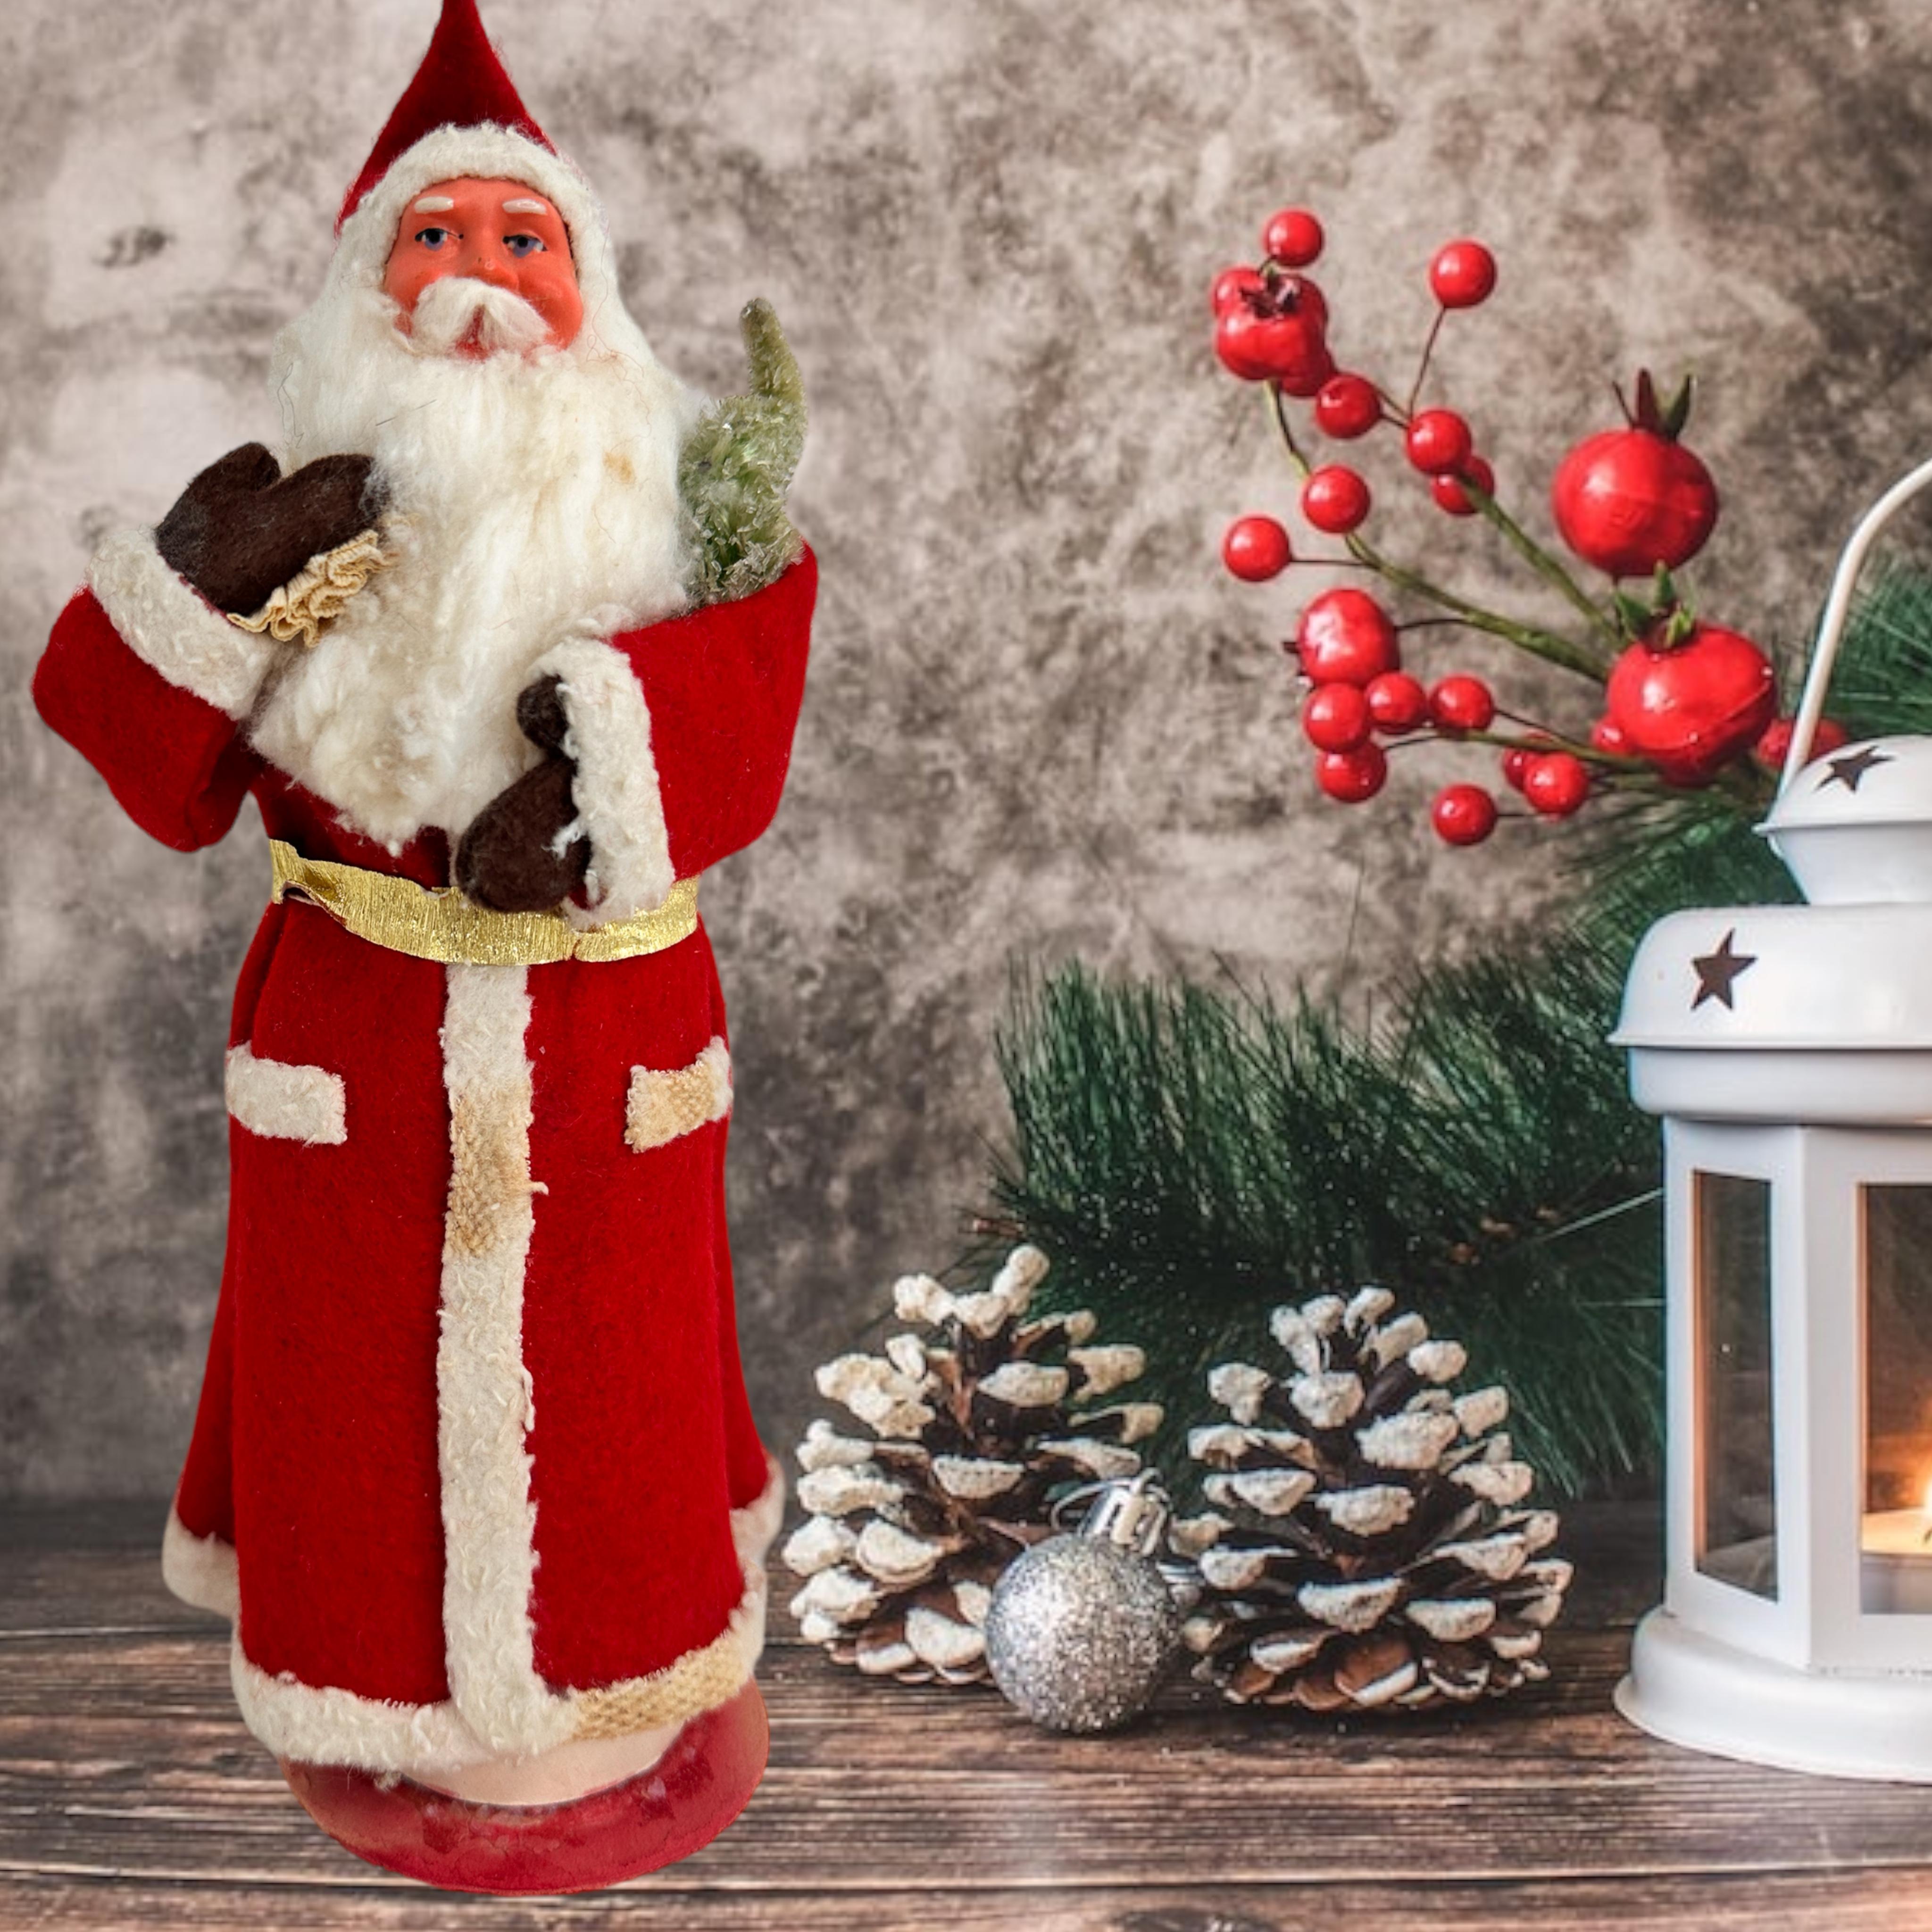 This vintage St.Nicholas, Santa Claus candy container made of composition, cardboard, felting and Papermache was made in the 20th century and is a charming addition to any Christmas collection. This original period piece was made in Germany and